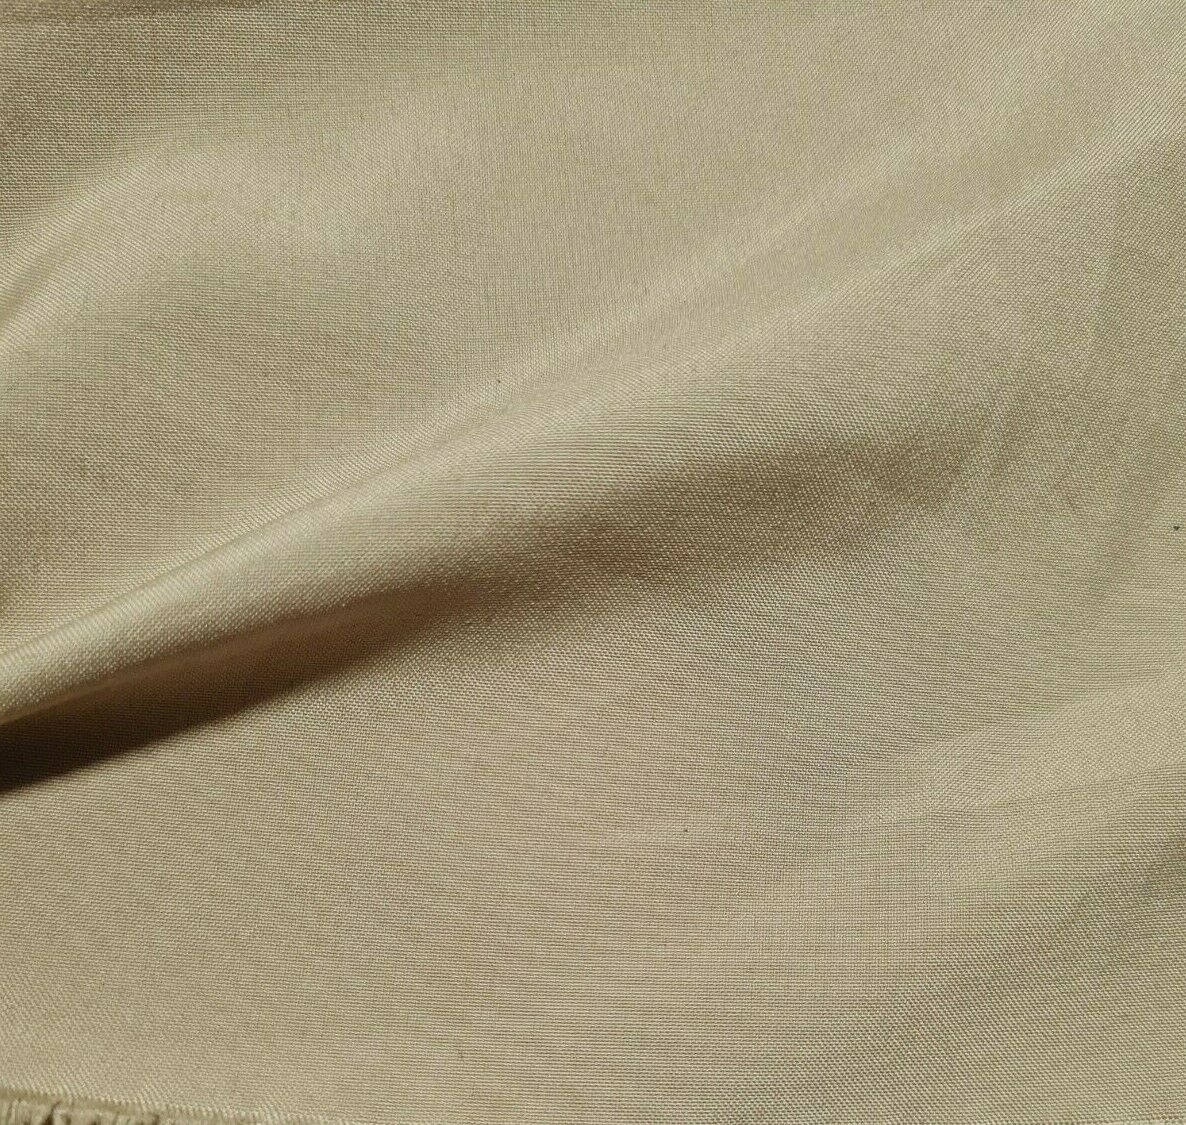 BEIGE COLOUR POLYESTER FABRIC - SOLD BY THE METRE